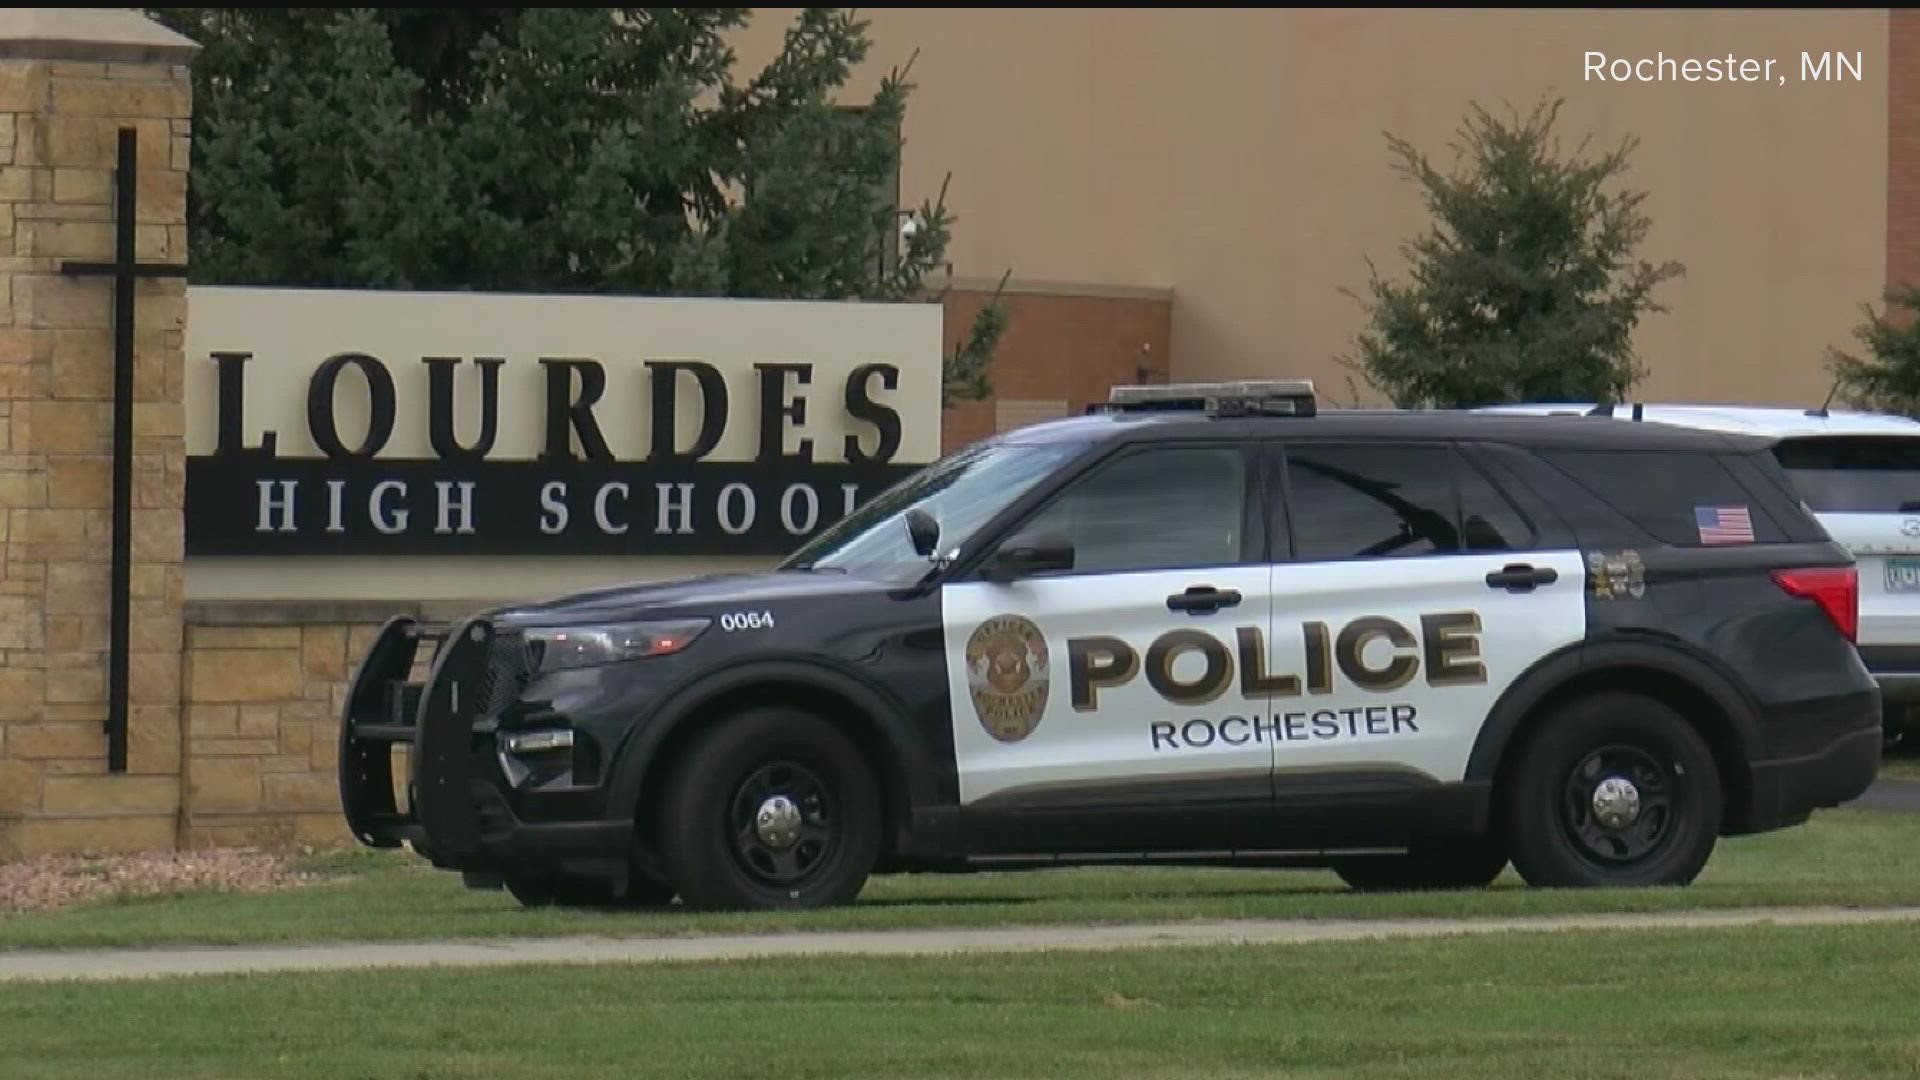 Law enforcement agencies across the state responded to more than a dozen unfounded reports of school shooters, prompting some buildings to go on lockdown Wednesday.